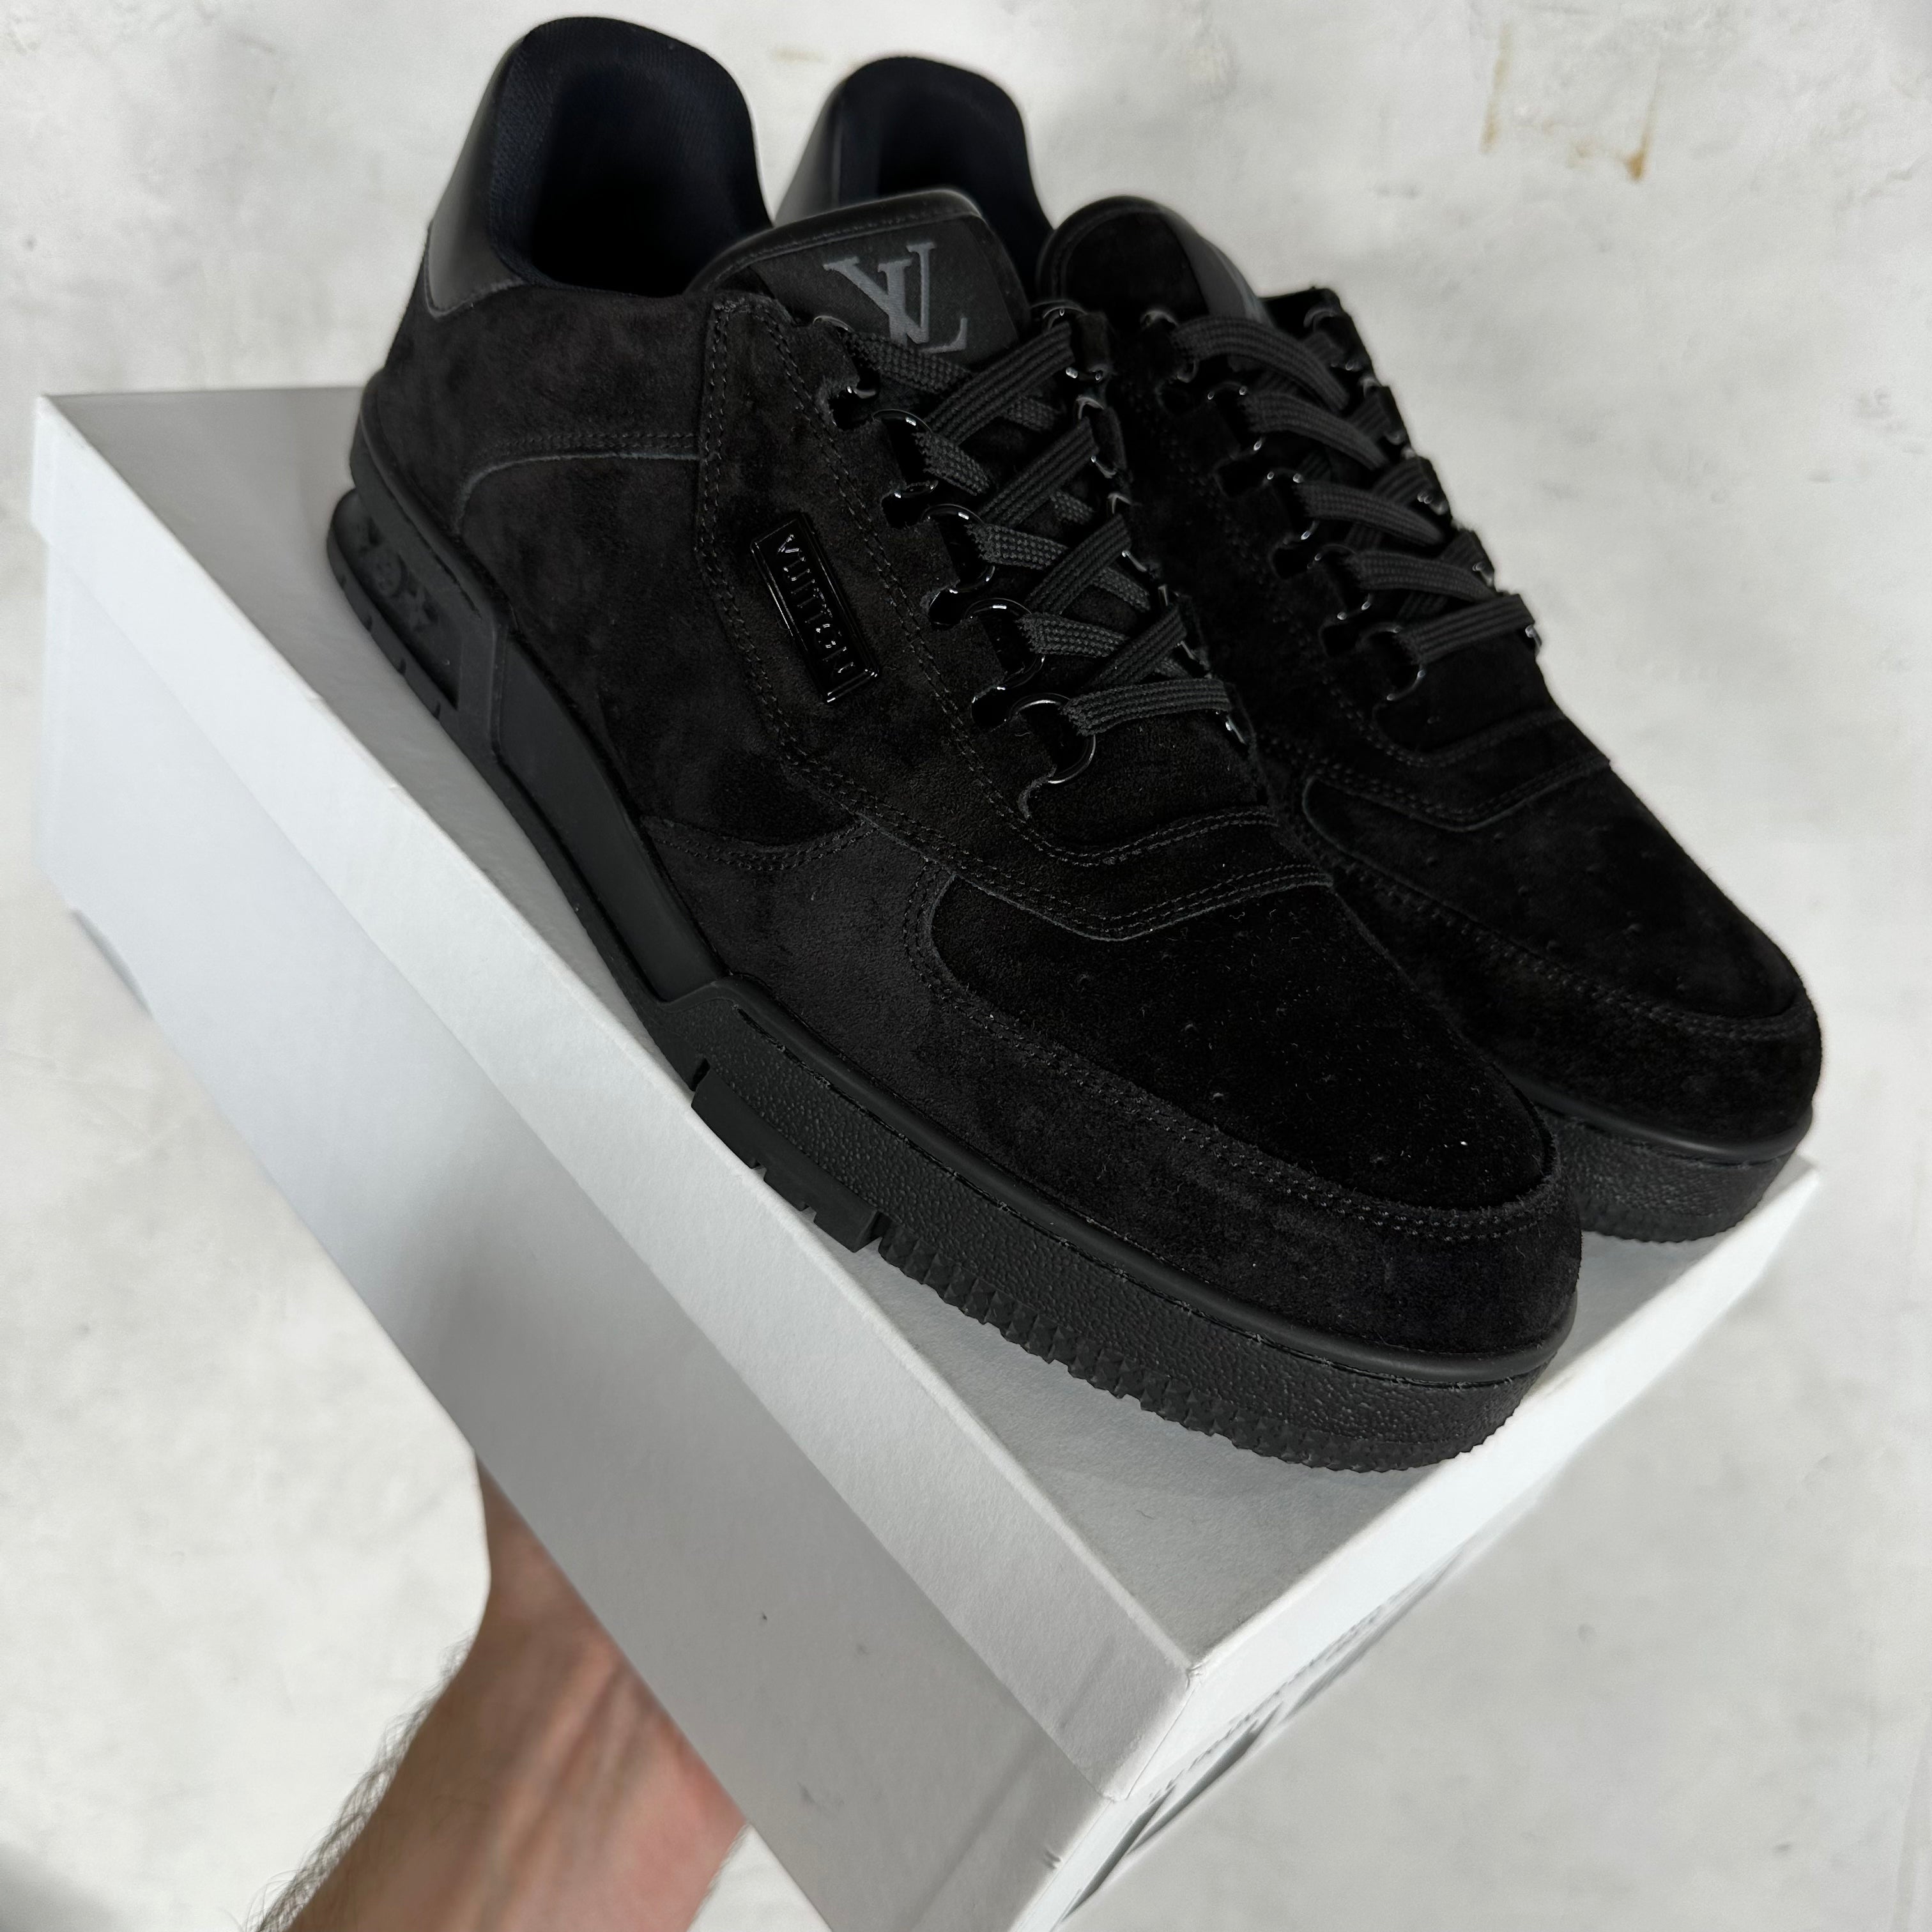 Louis Vuitton Black Suede Employee Exclusive Trainers